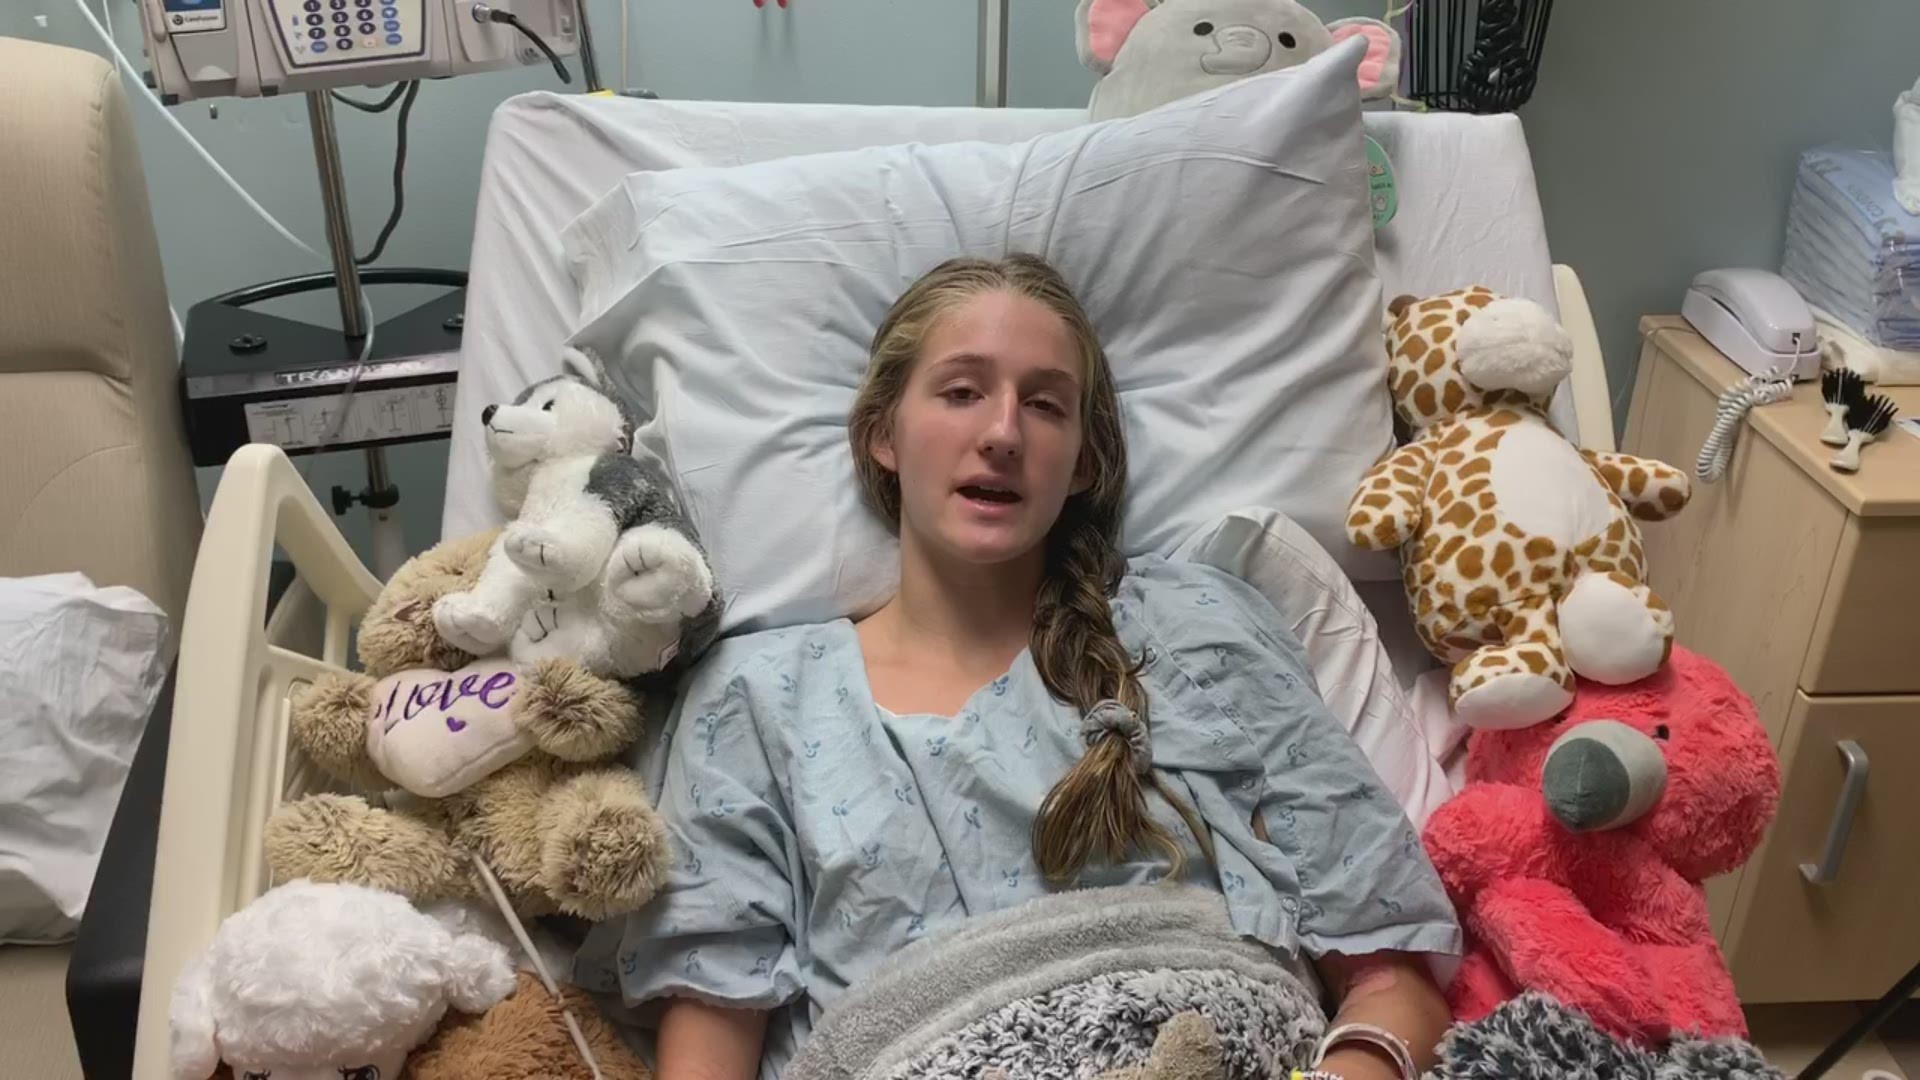 Zoe Ordway was T-boned about two weeks ago at a notorious intersection in Forsyth County.